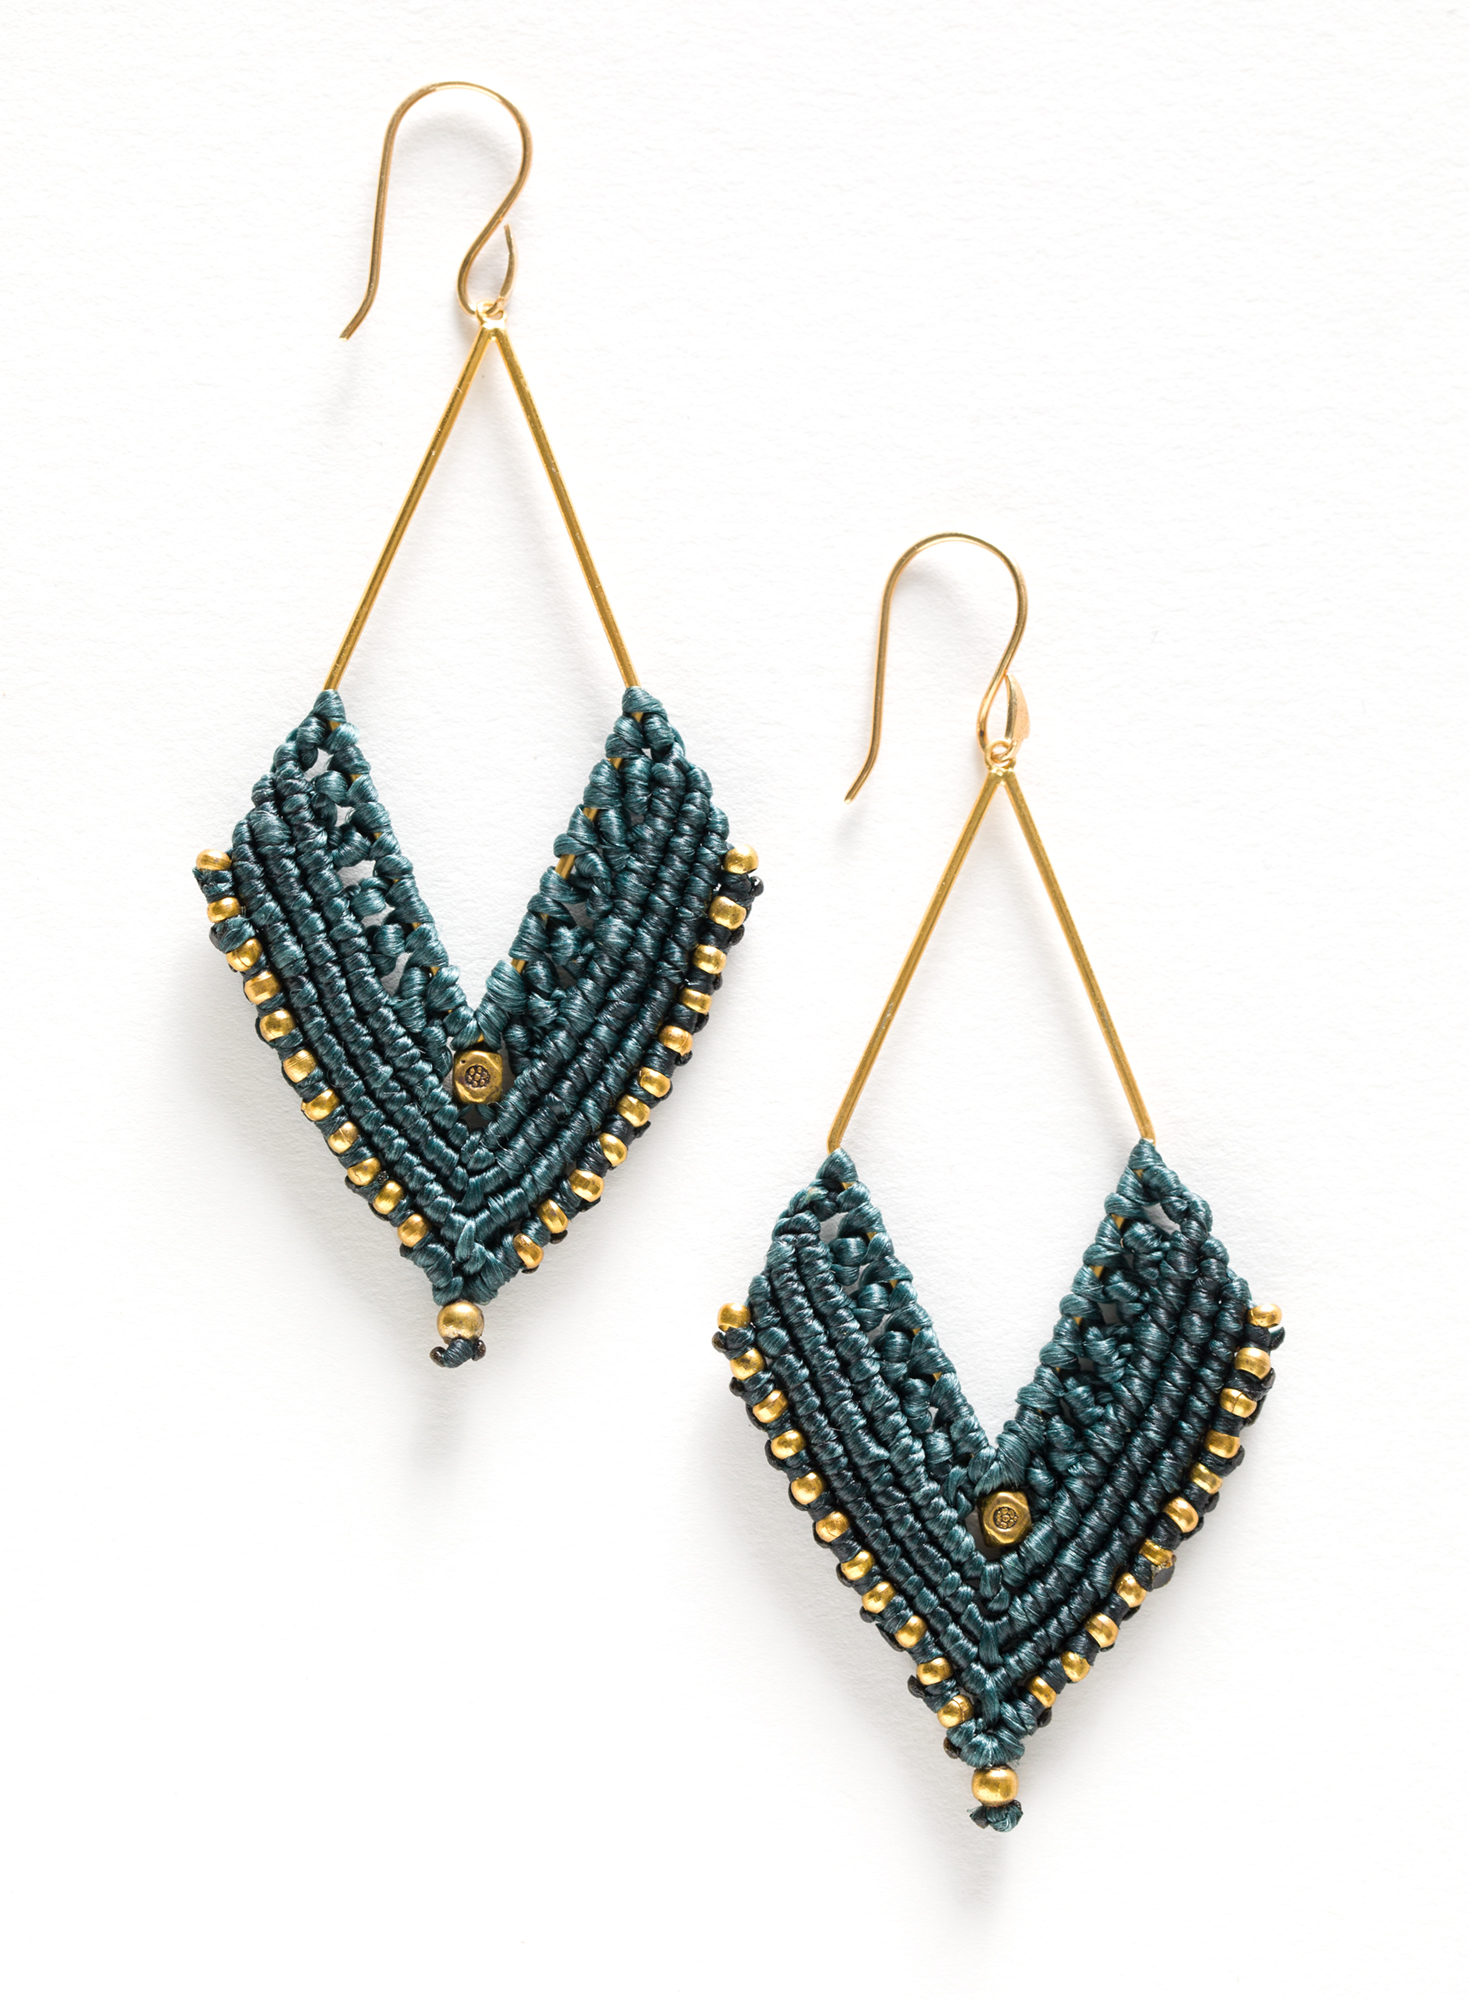 Multicolor Plastic Macrame Earrings No Ear Piercing Required Perfect For  Parties, Punk Gifts, And Special Occasions Unisex Design From Everyday68,  $1.01